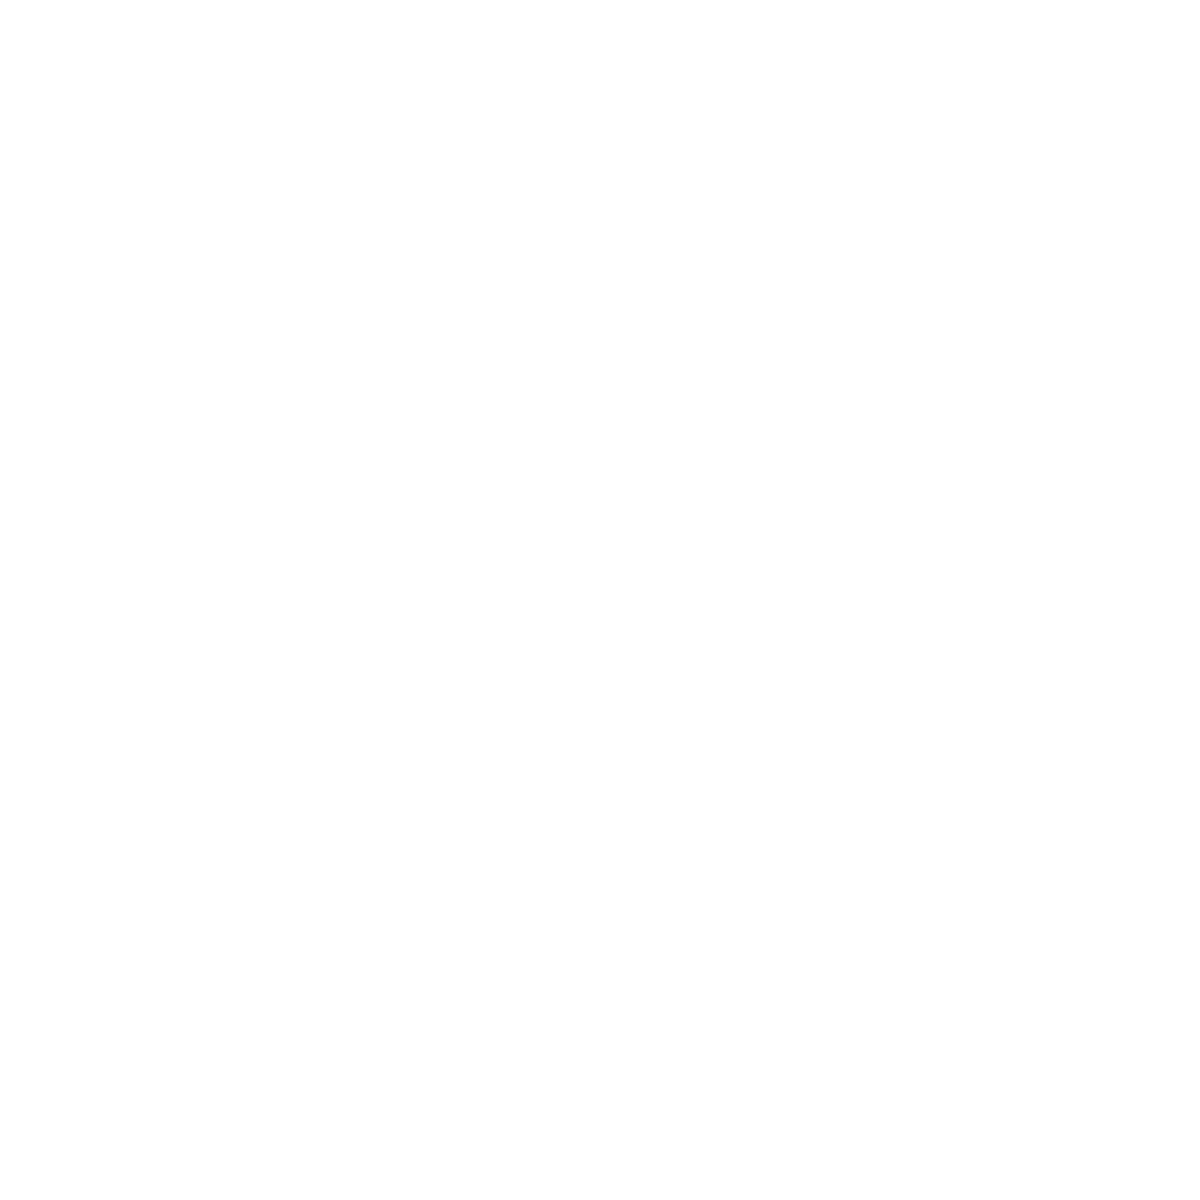 Omnibrand Group